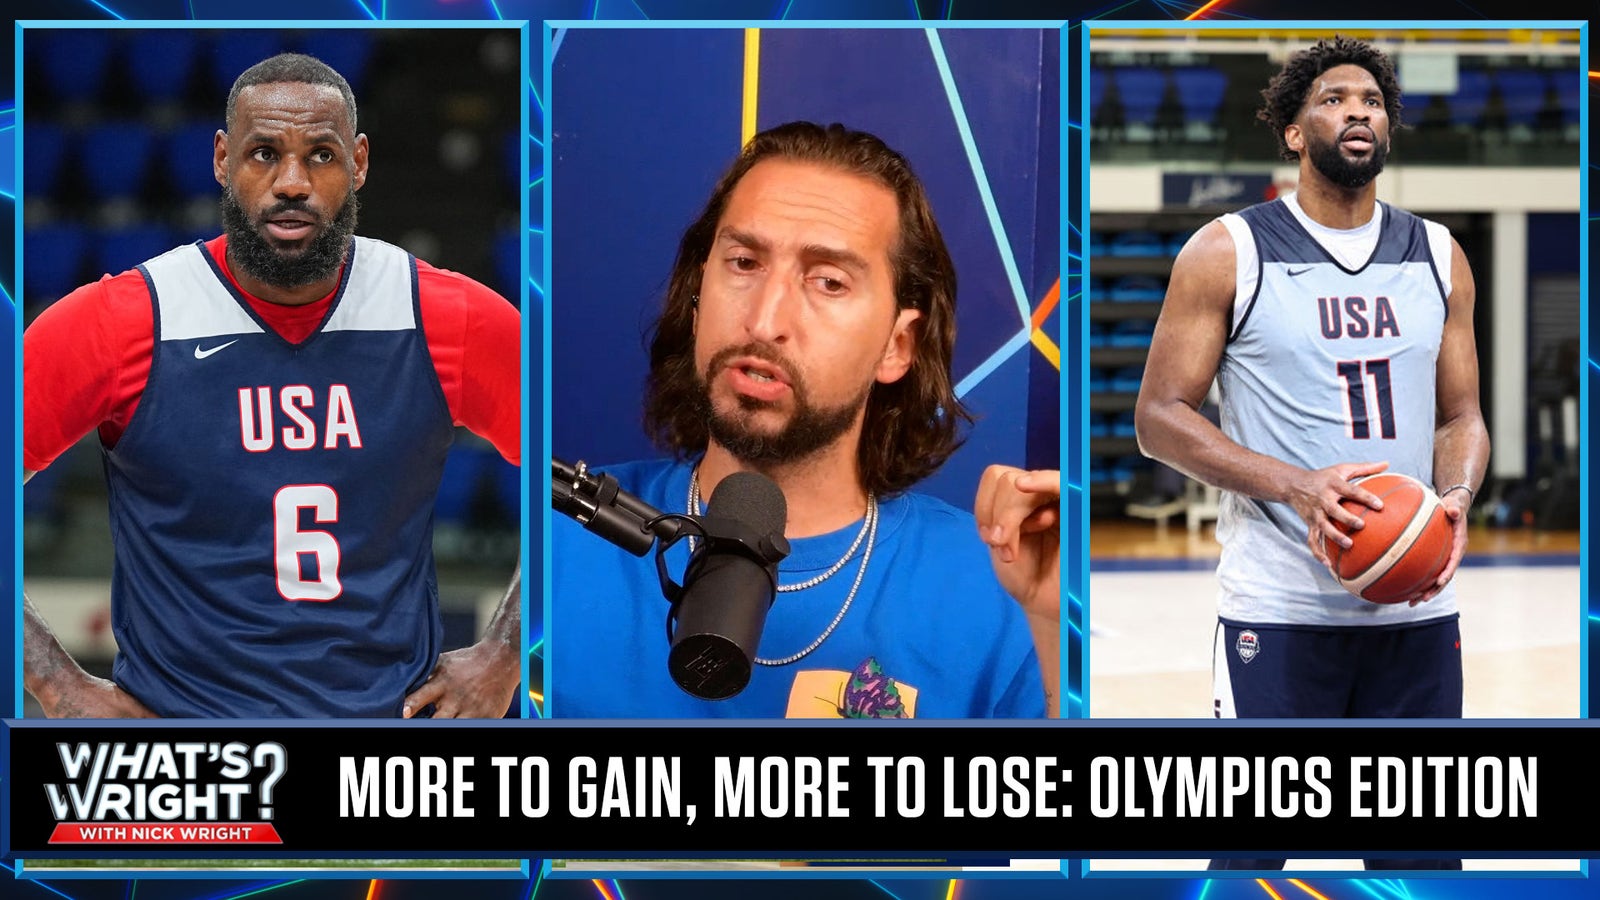 LeBron and Embiid have the most to lose, Jokić has most to gain in Summer Olympics